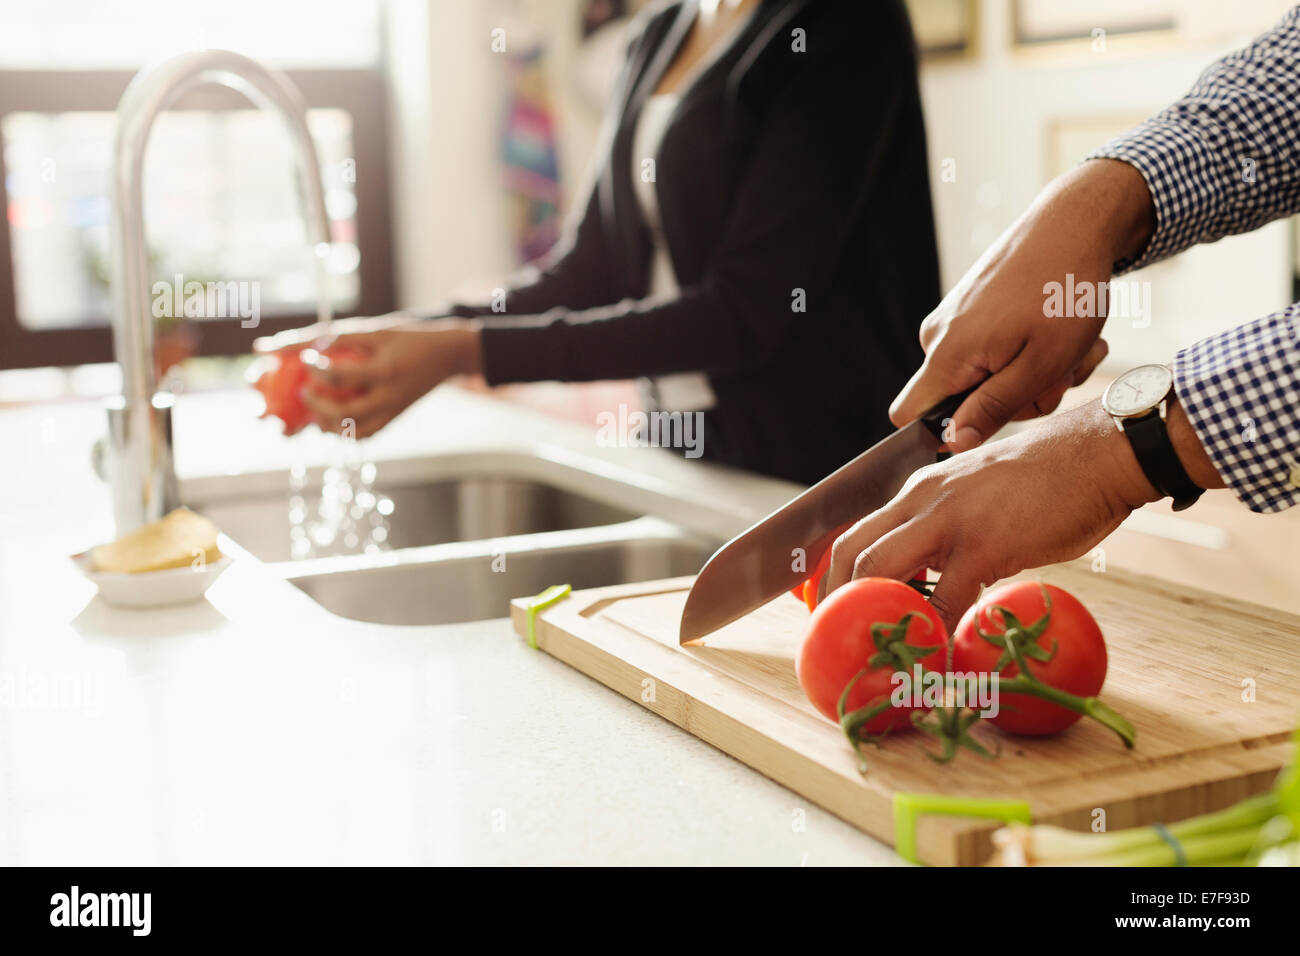 Mixed Race couple cooking together in kitchen Banque D'Images